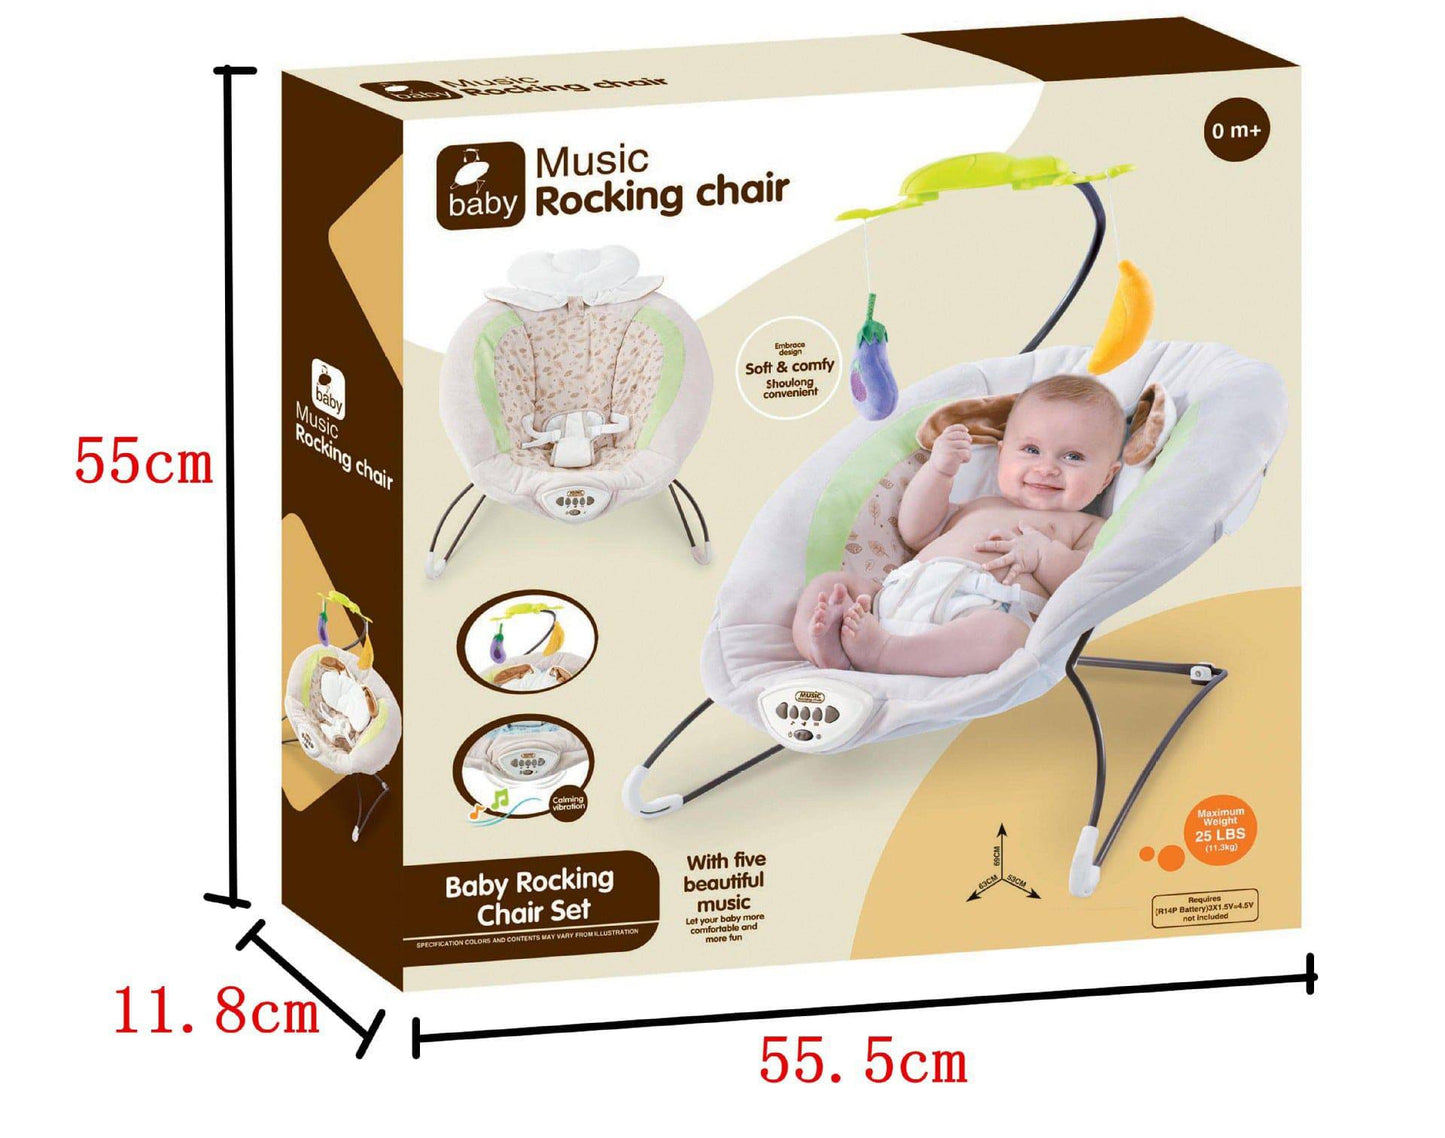 COOLBABY Intelligent Remote-Controlled Baby Rocking Bed - COOL BABY